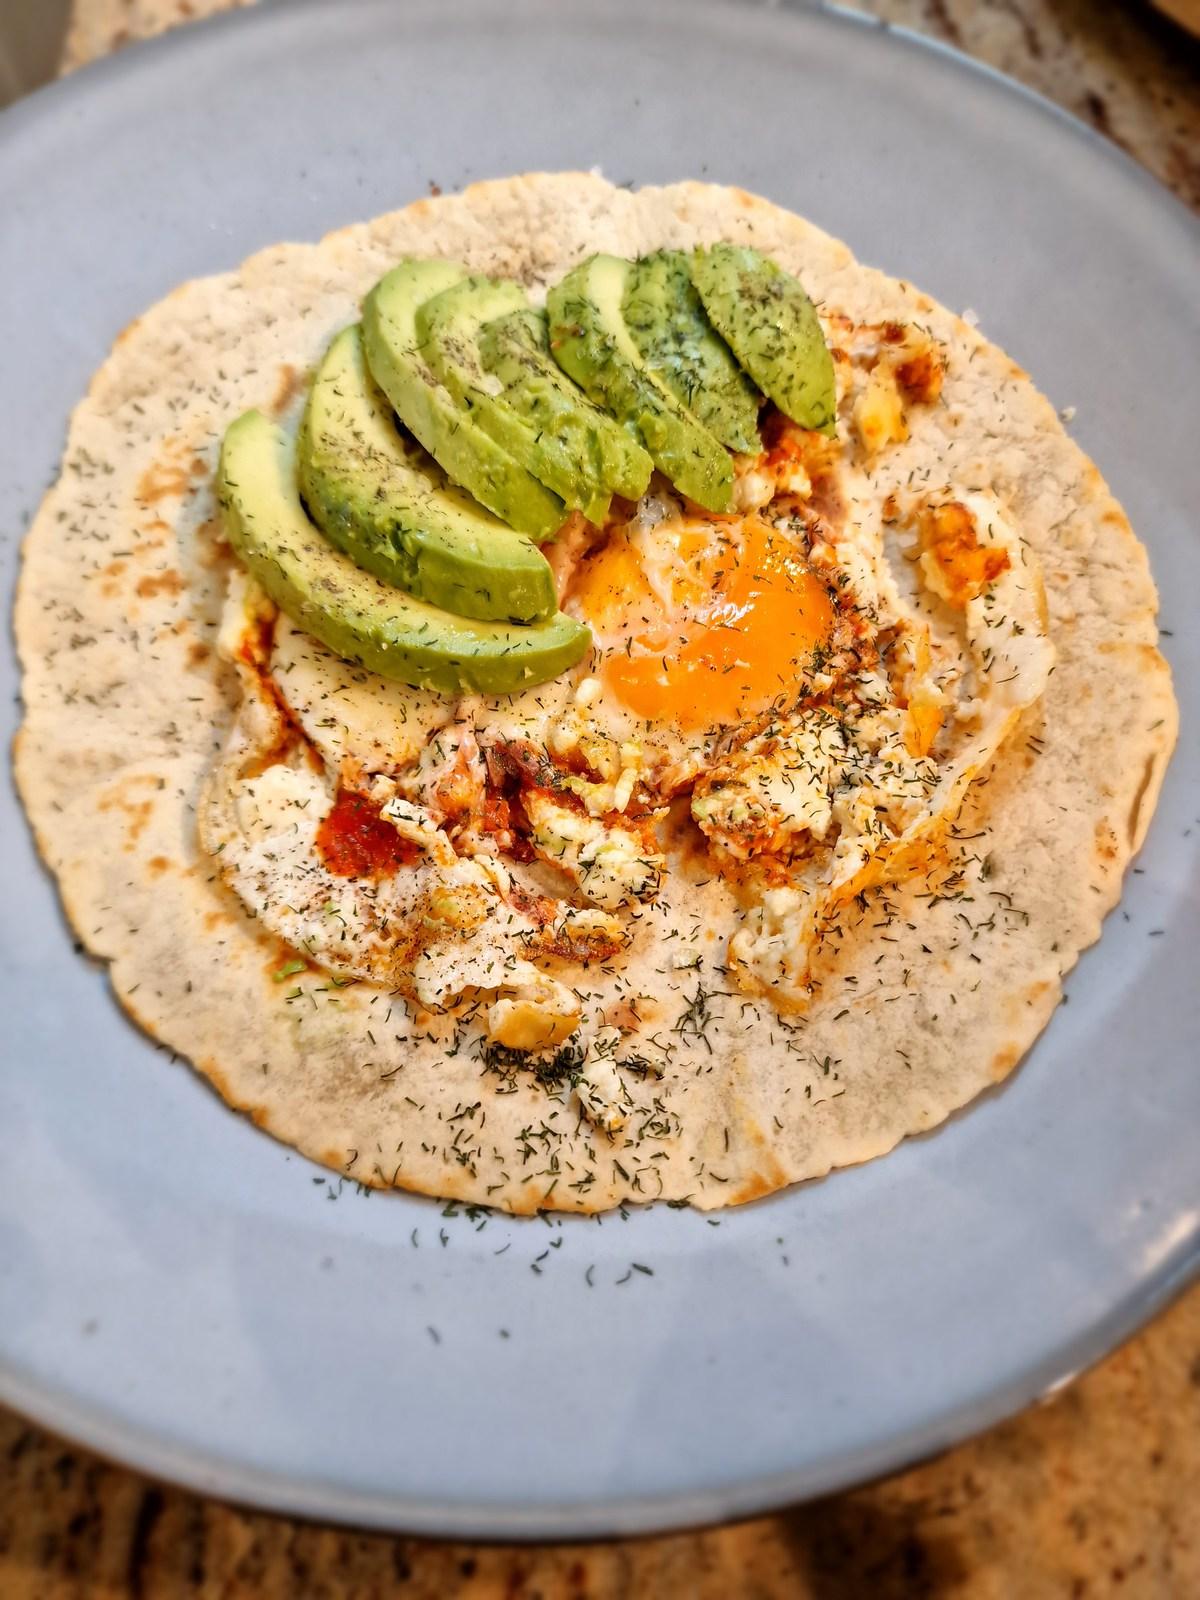 Delicious Feta Fried Egg on a Low Carb Tortilla with Pesto and Avocado Slices